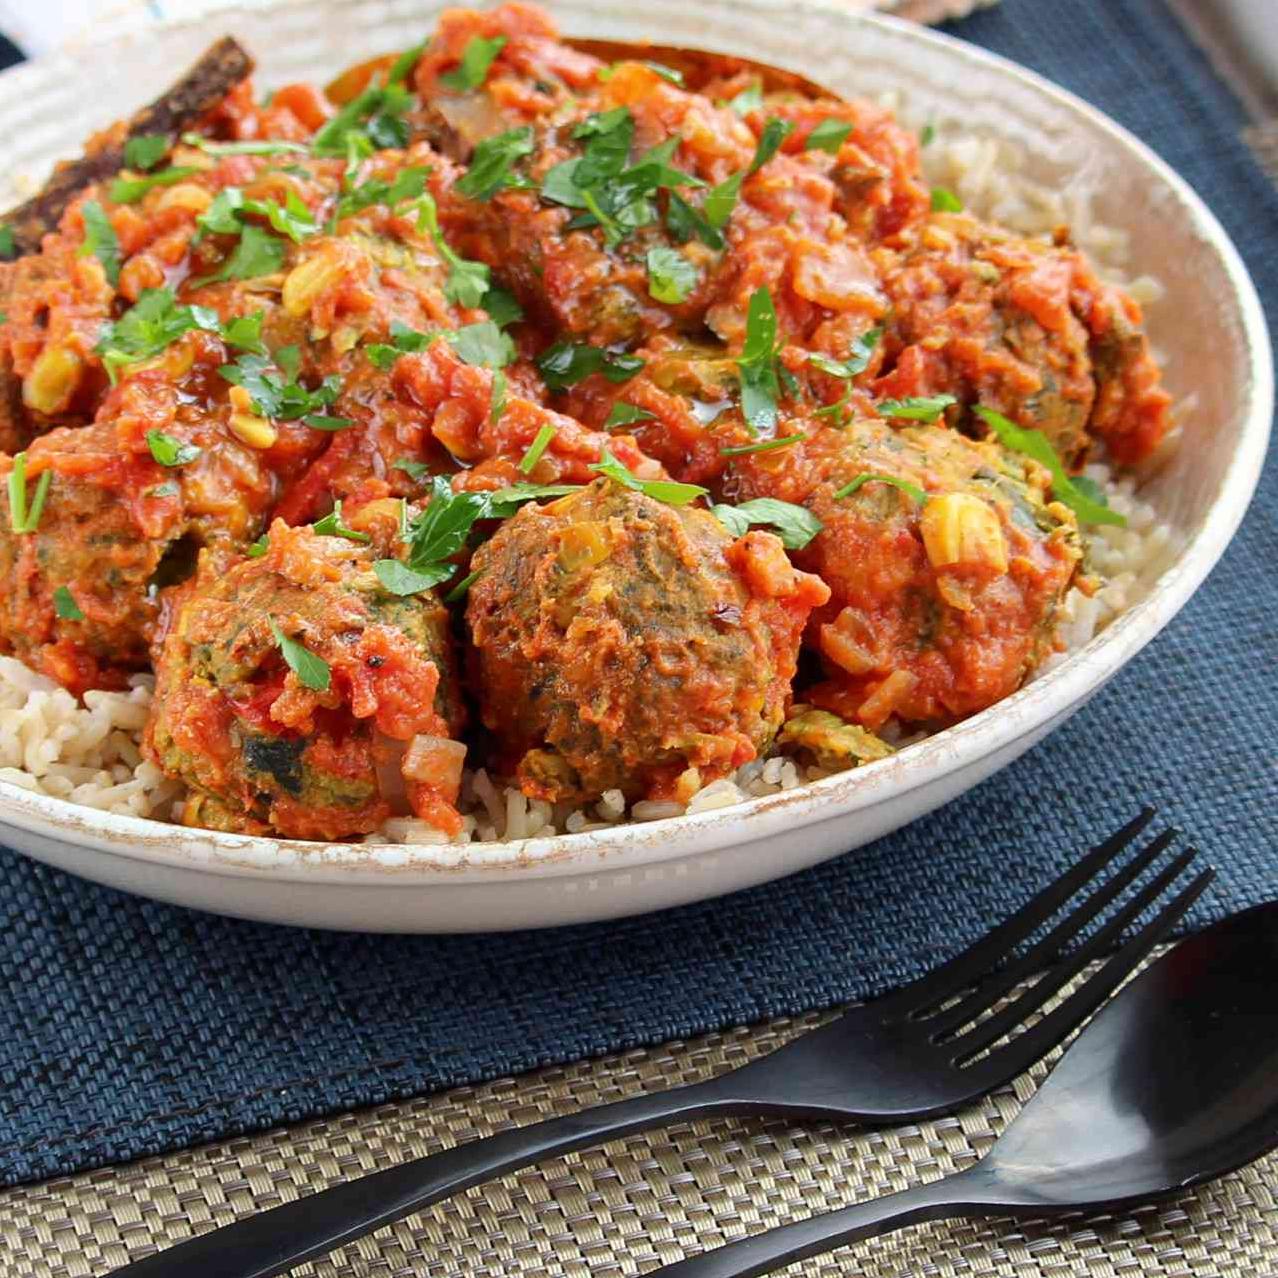  Try making these koftas with different spices for a unique flavor every time.